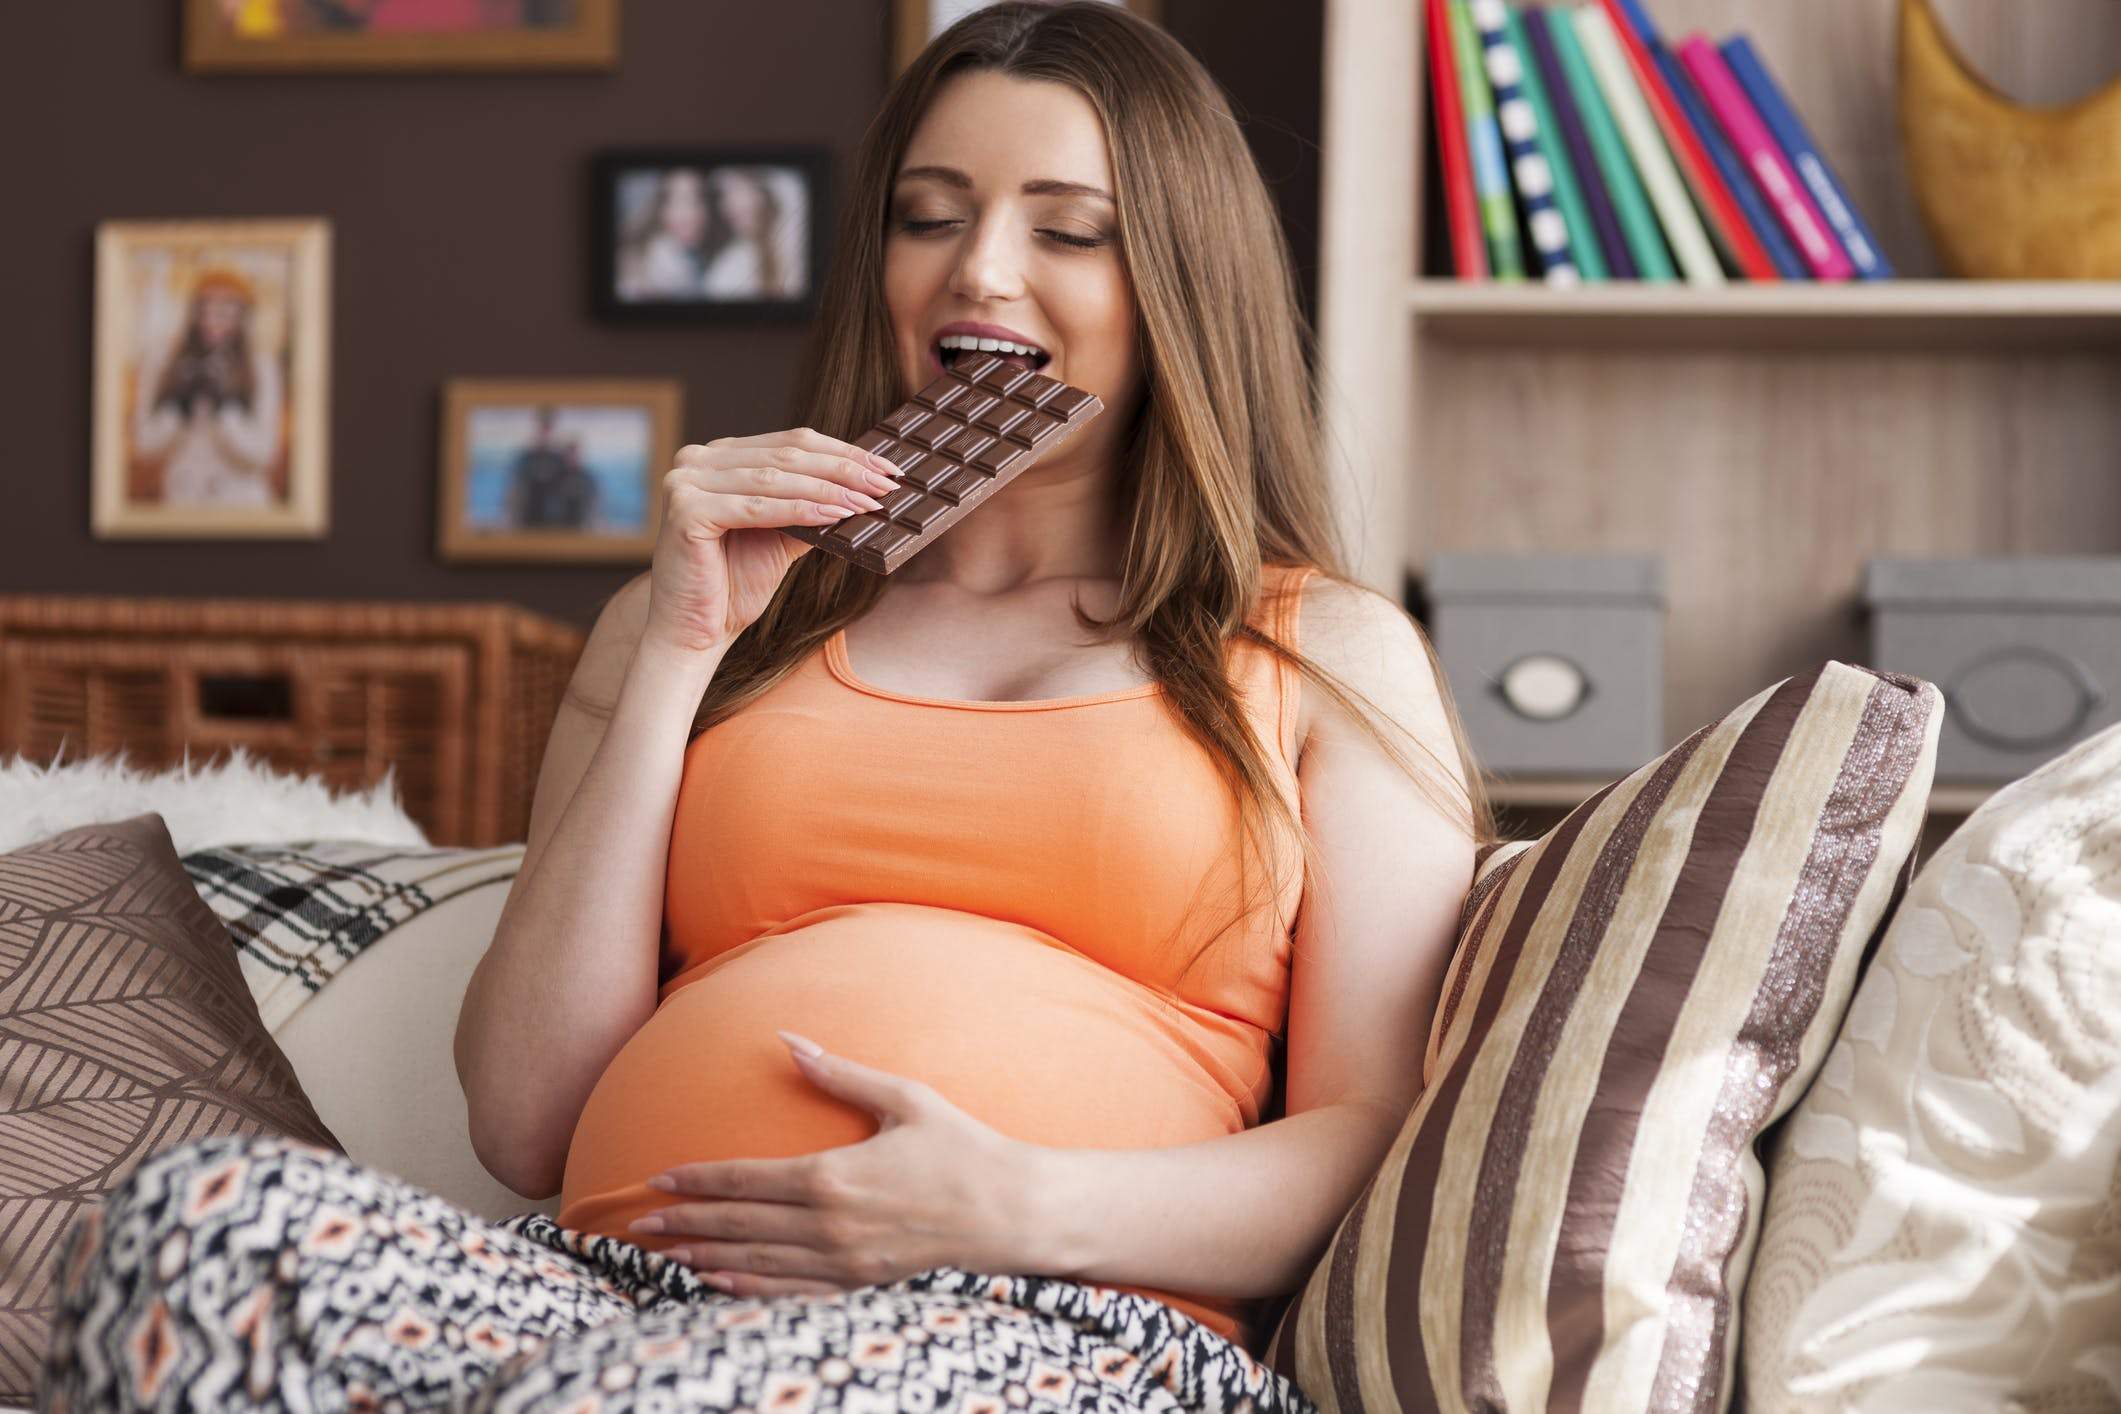 Sugar Intake During Pregnancy is Linked to Child’s Allergies and Asthma